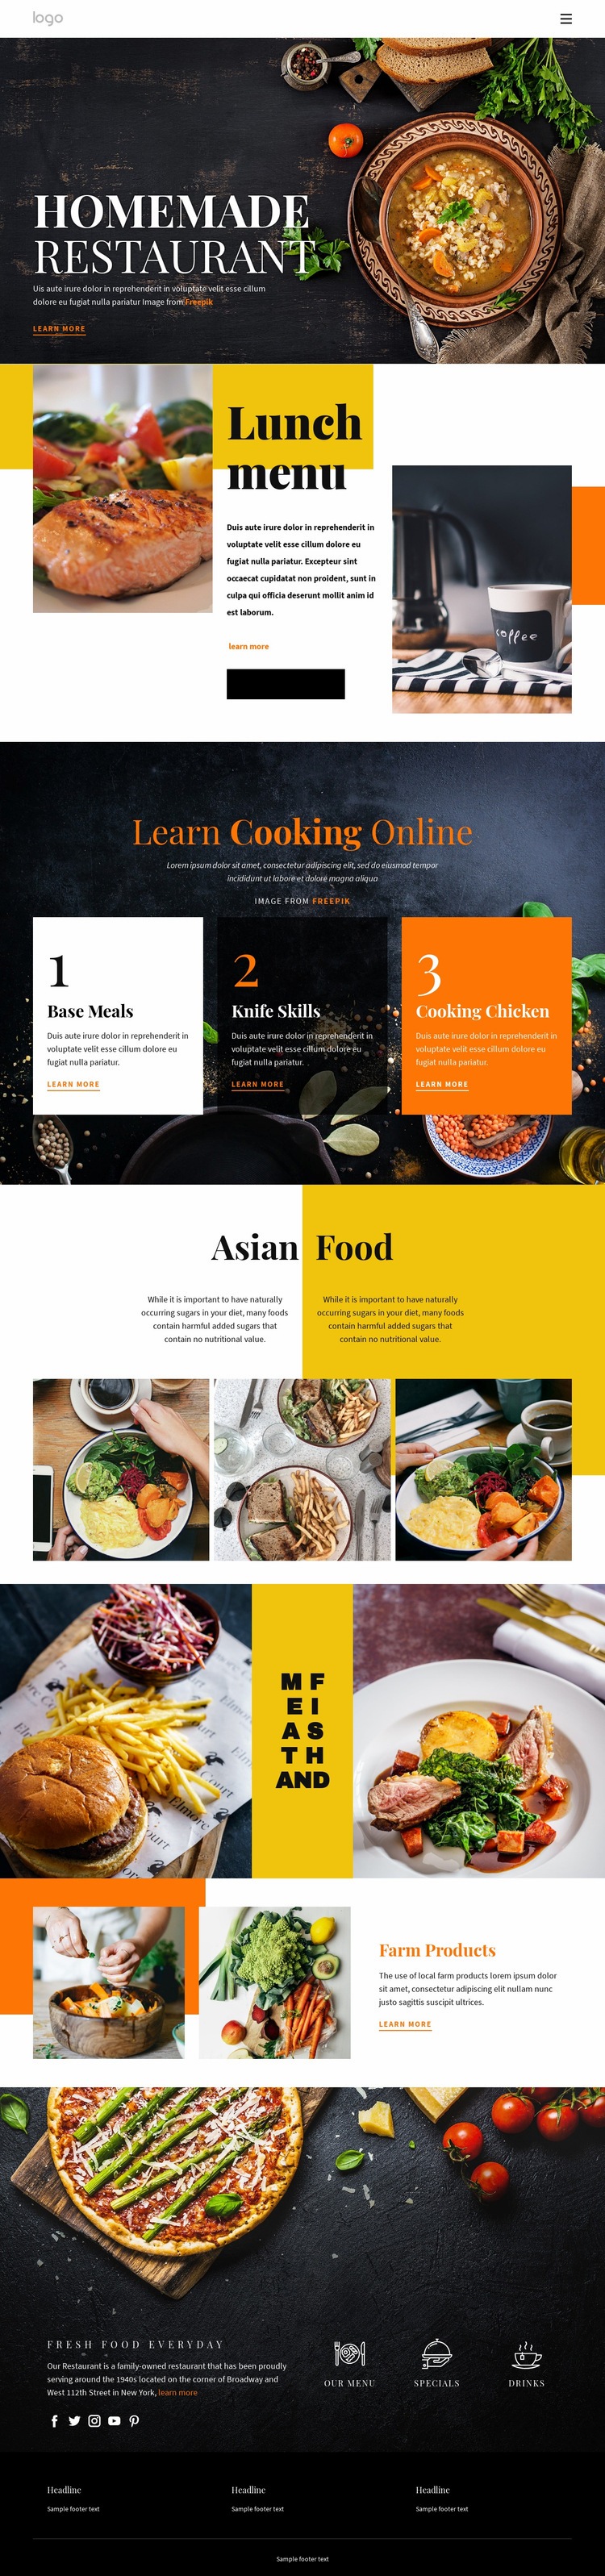 Better than home food Web Page Design